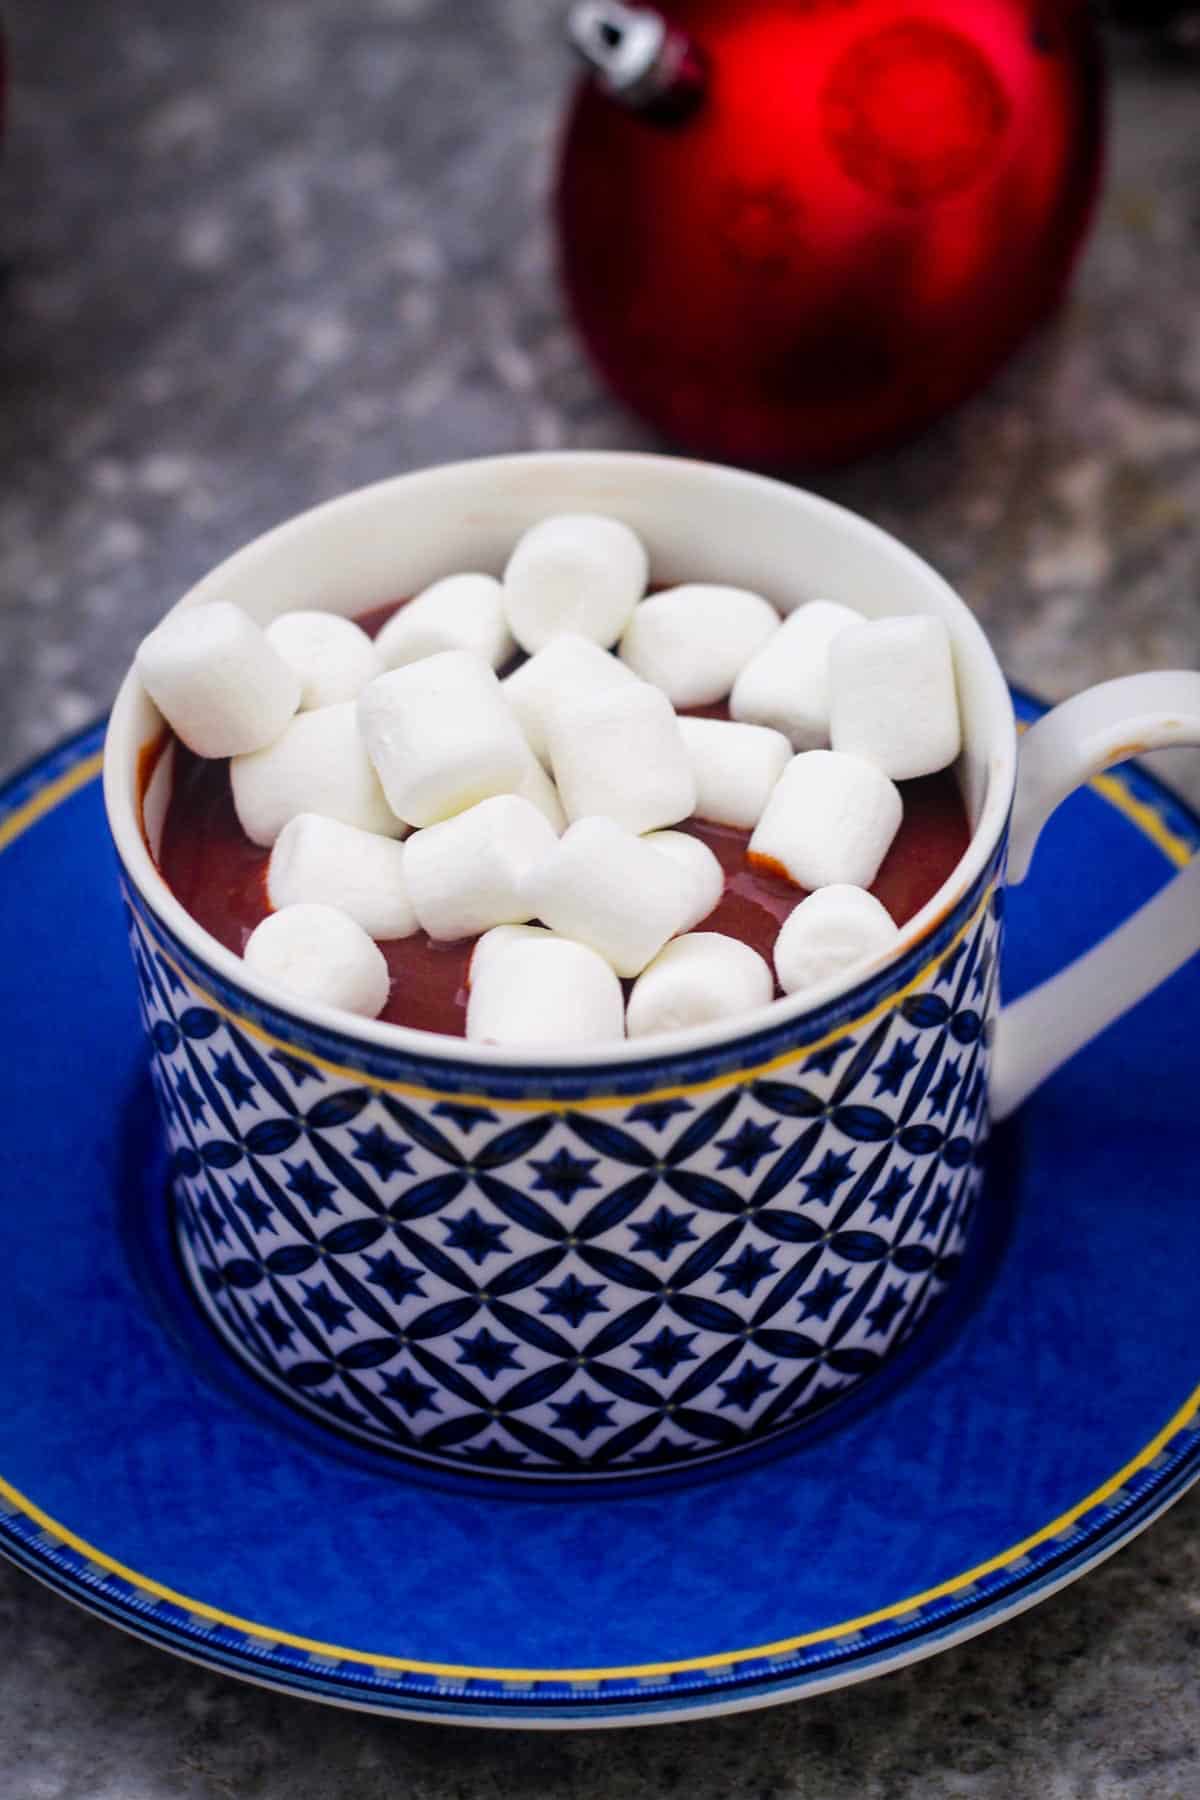 Hot chocolate with marshmallows on a cup over a saucer.